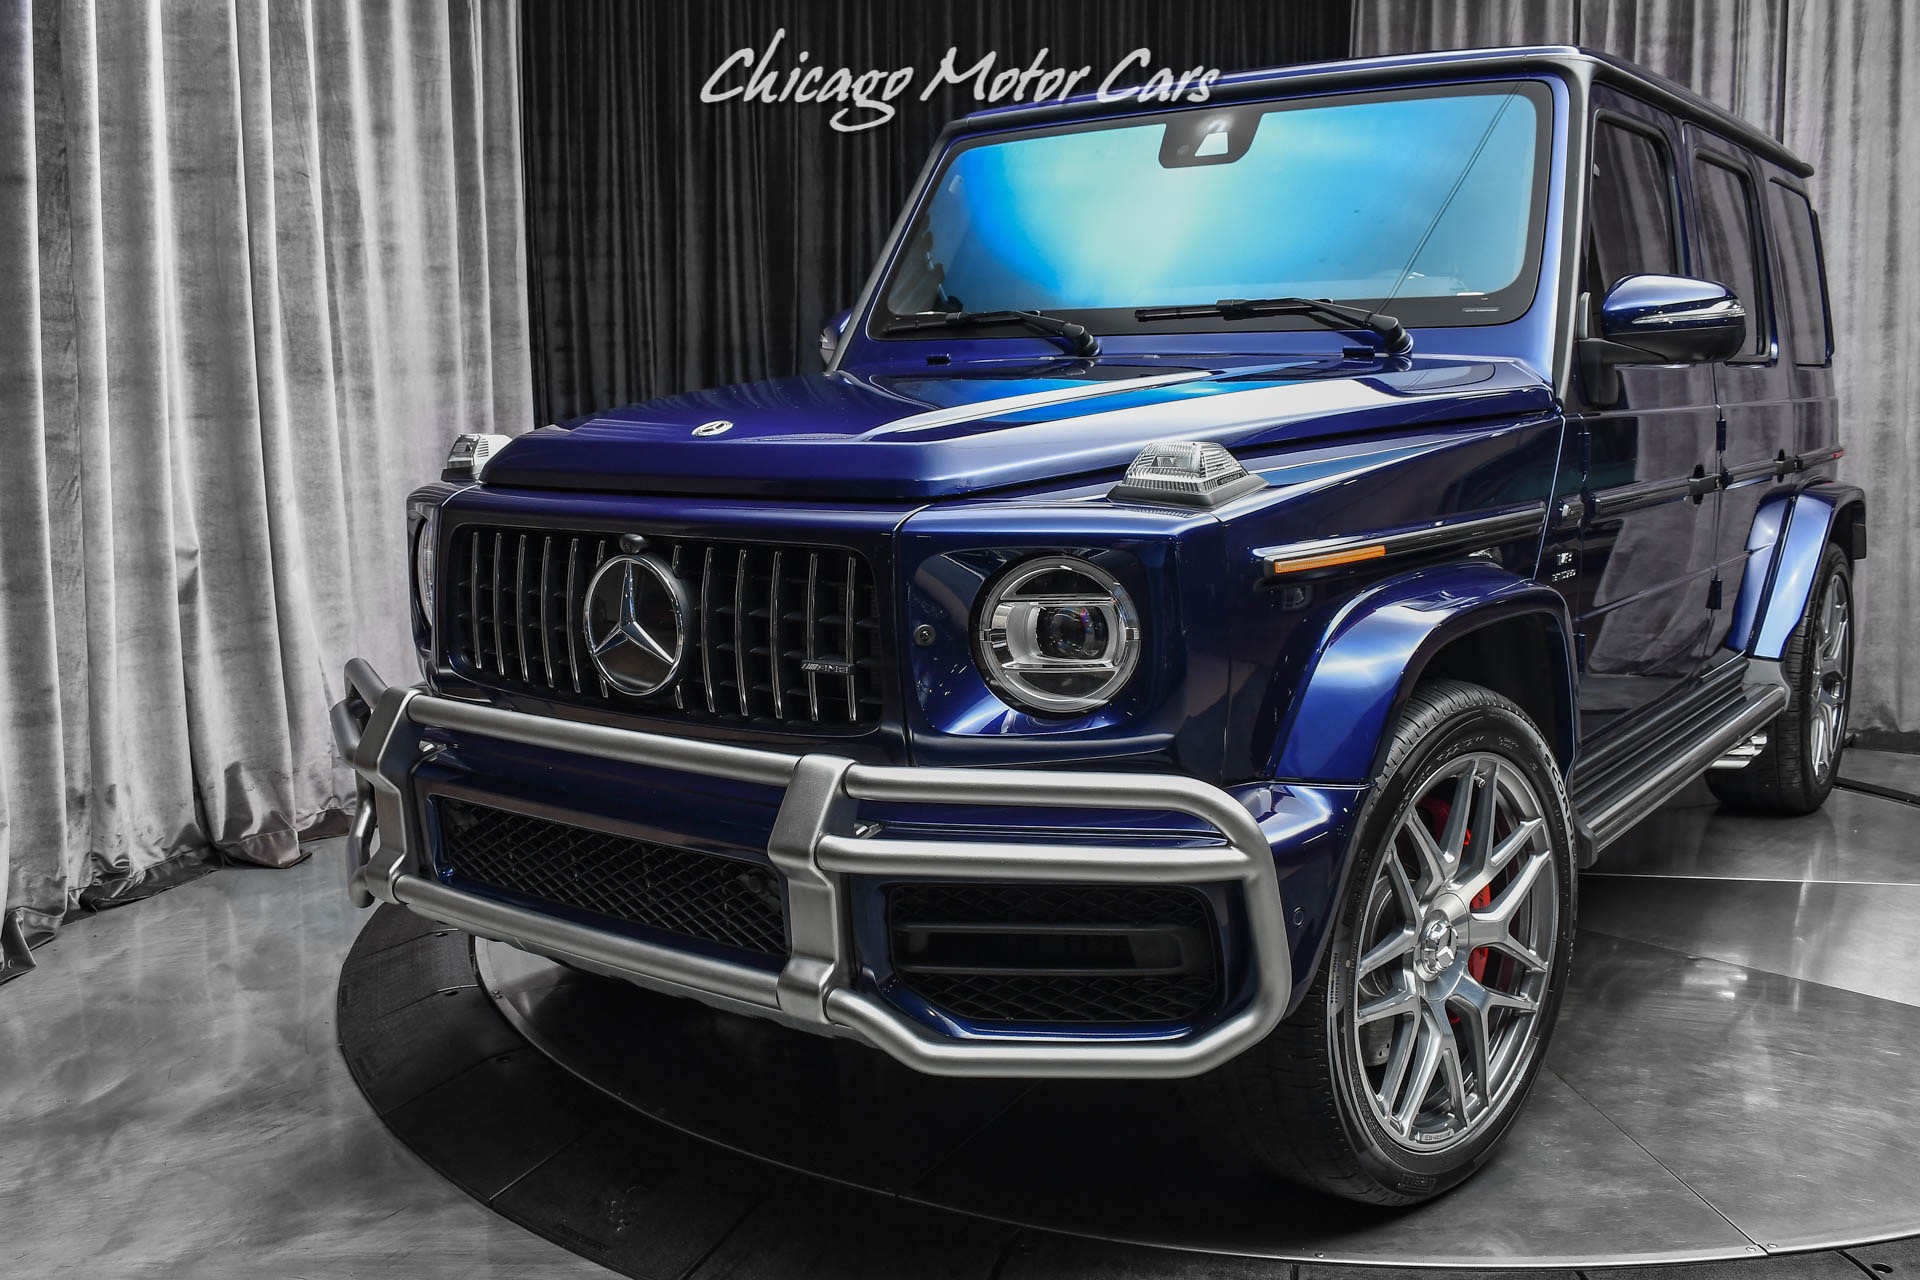 https://www.chicagomotorcars.com/imagetag/8262/39/l/Used-2021-Mercedes-Benz-G63-AMG-SUV-RARE-Designo-Mystic-Blue-ONLY-1900-Miles-Exclusive-Interior-Pack.jpg